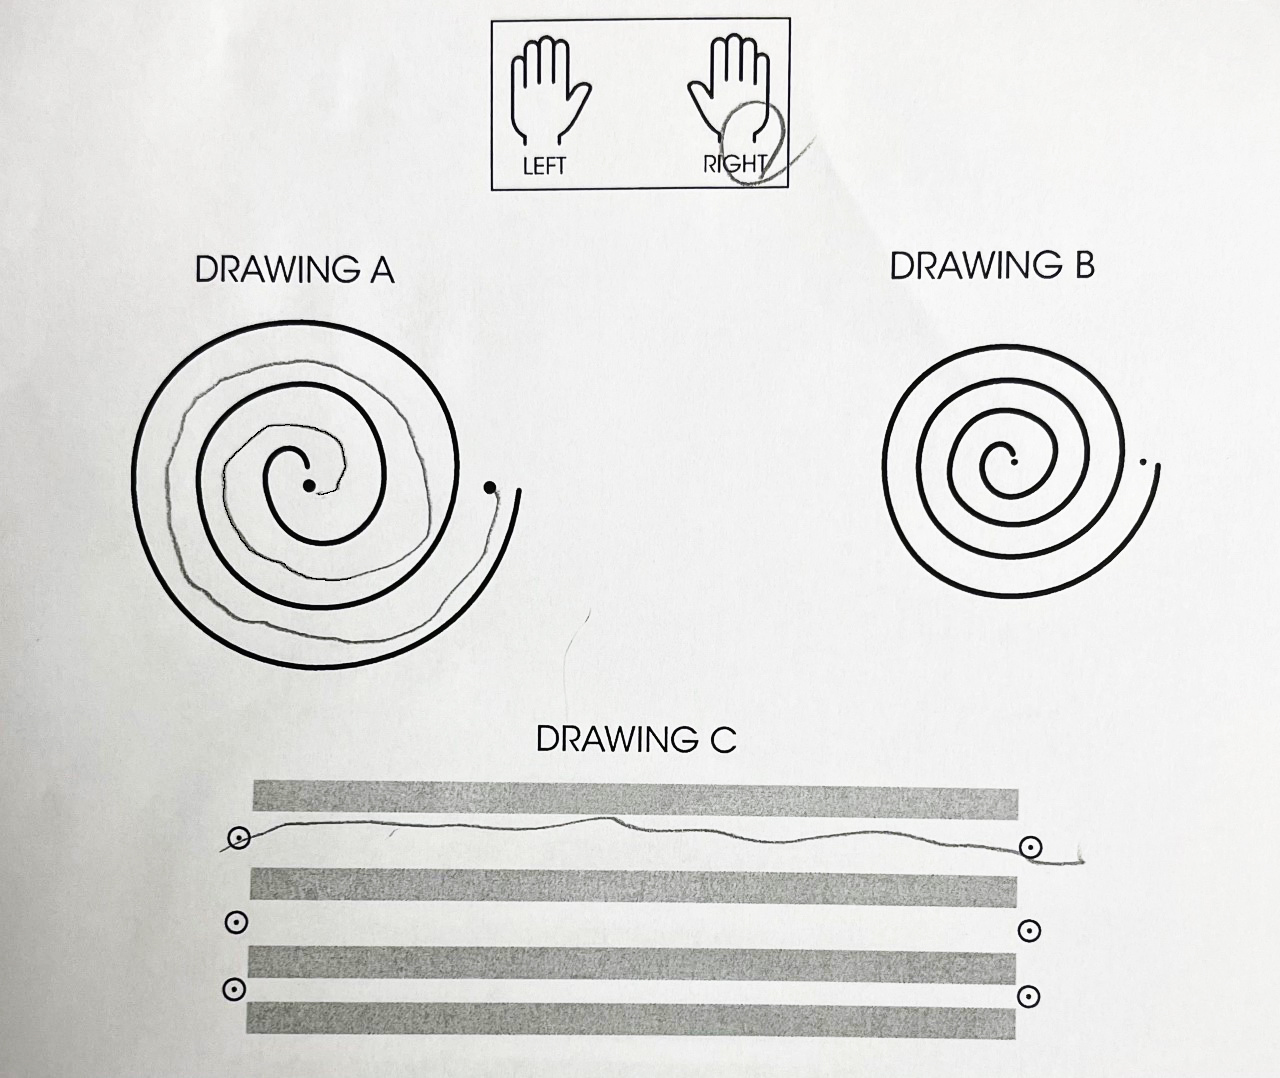 A printed spiral copied by hand to test the effect of a patients treatment for essential tremor following focused ultrasound treatment